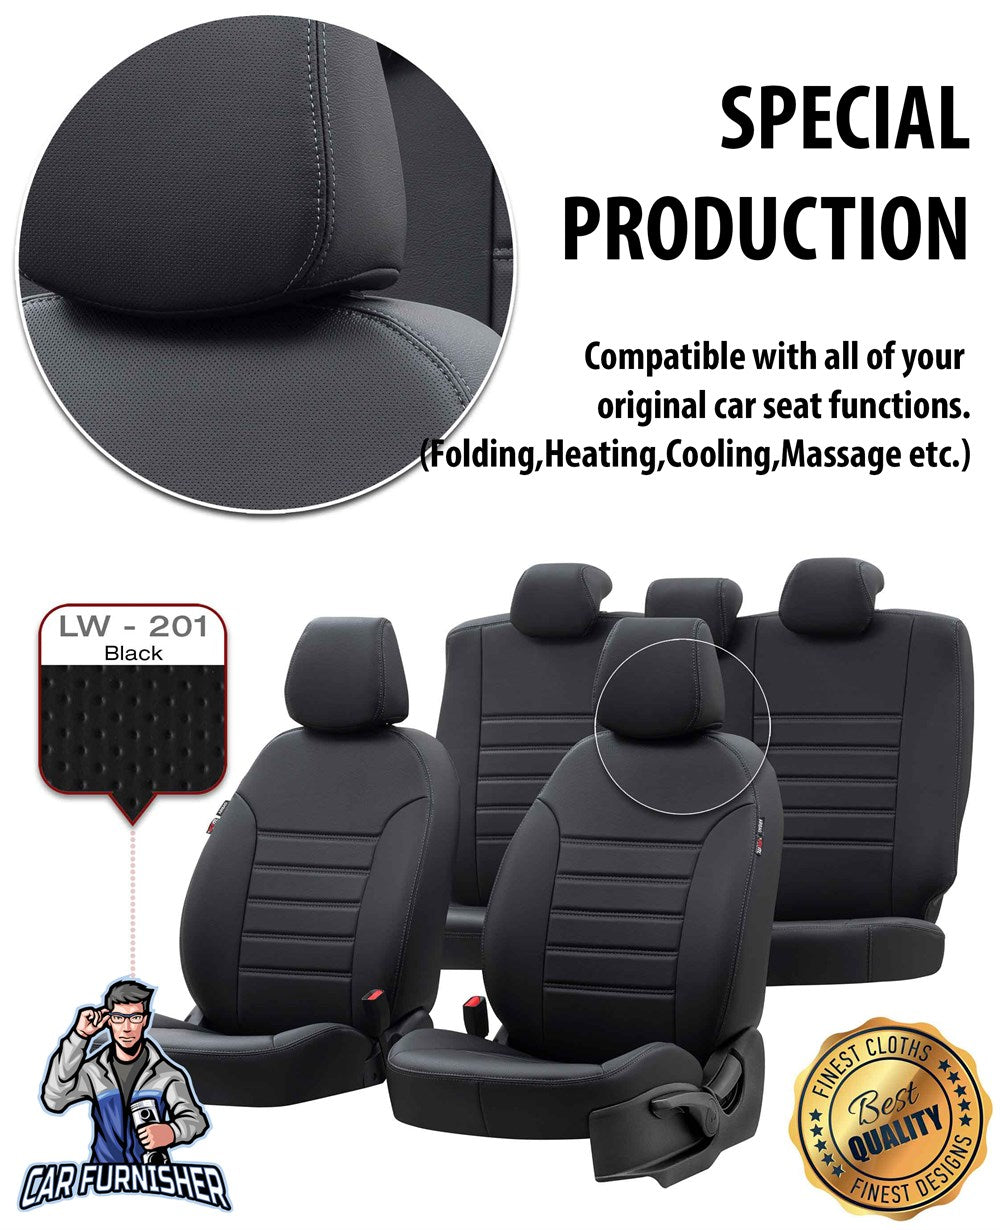 Opel Vectra Seat Covers Istanbul Leather Design Black Leather